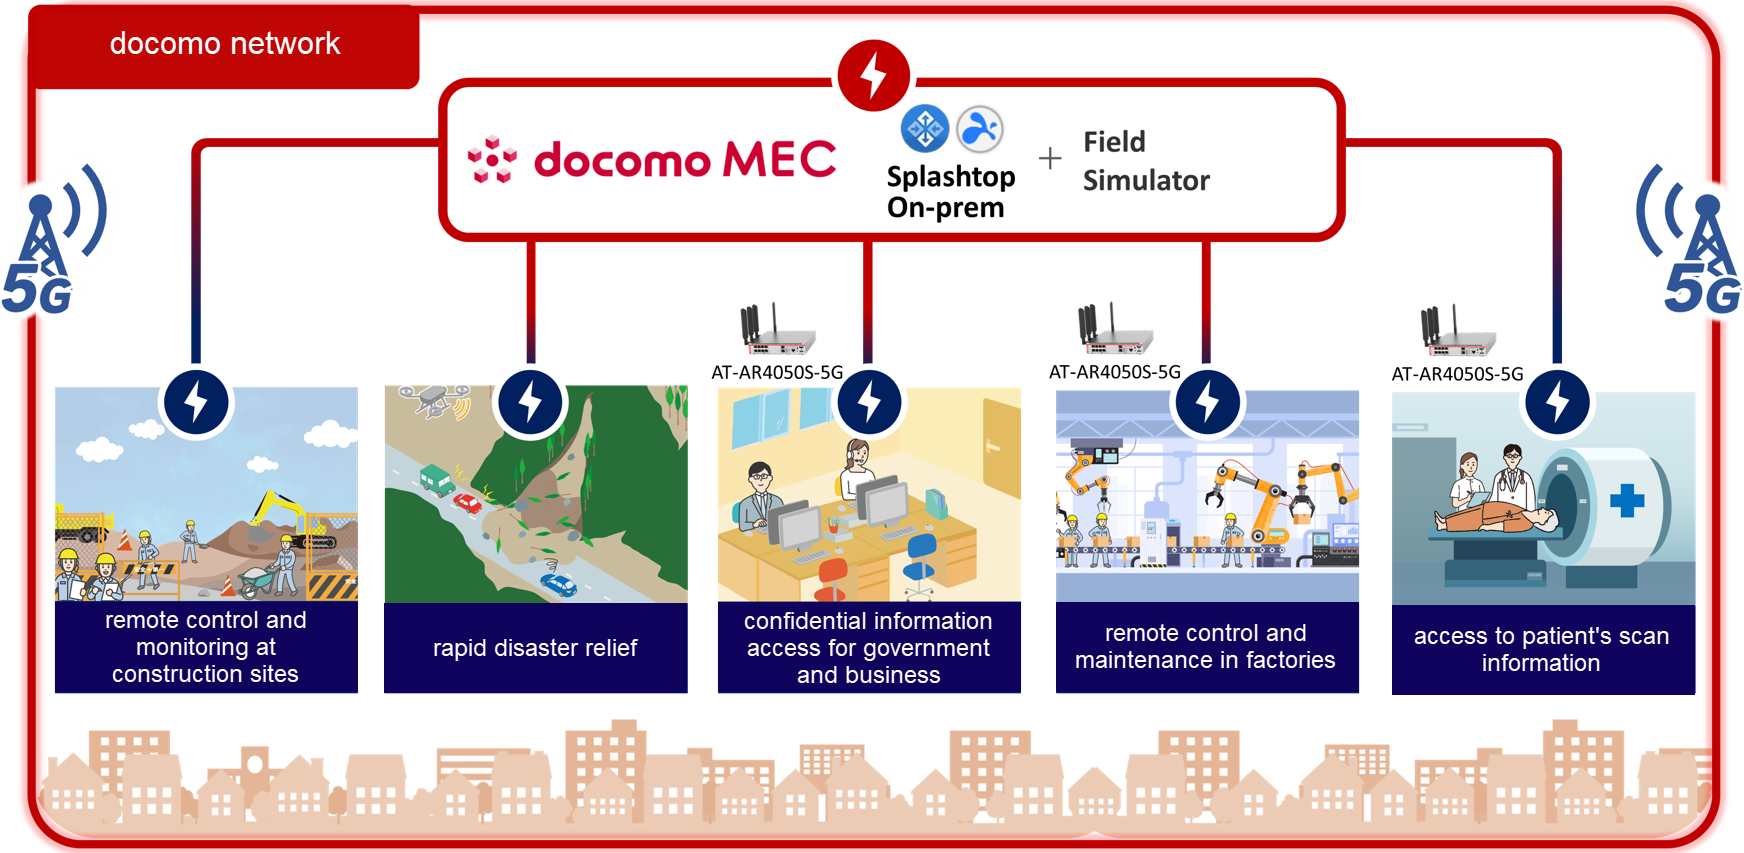 pictorial diagram of the 5G docomo MEC applications, using the AR4050S-5G router.